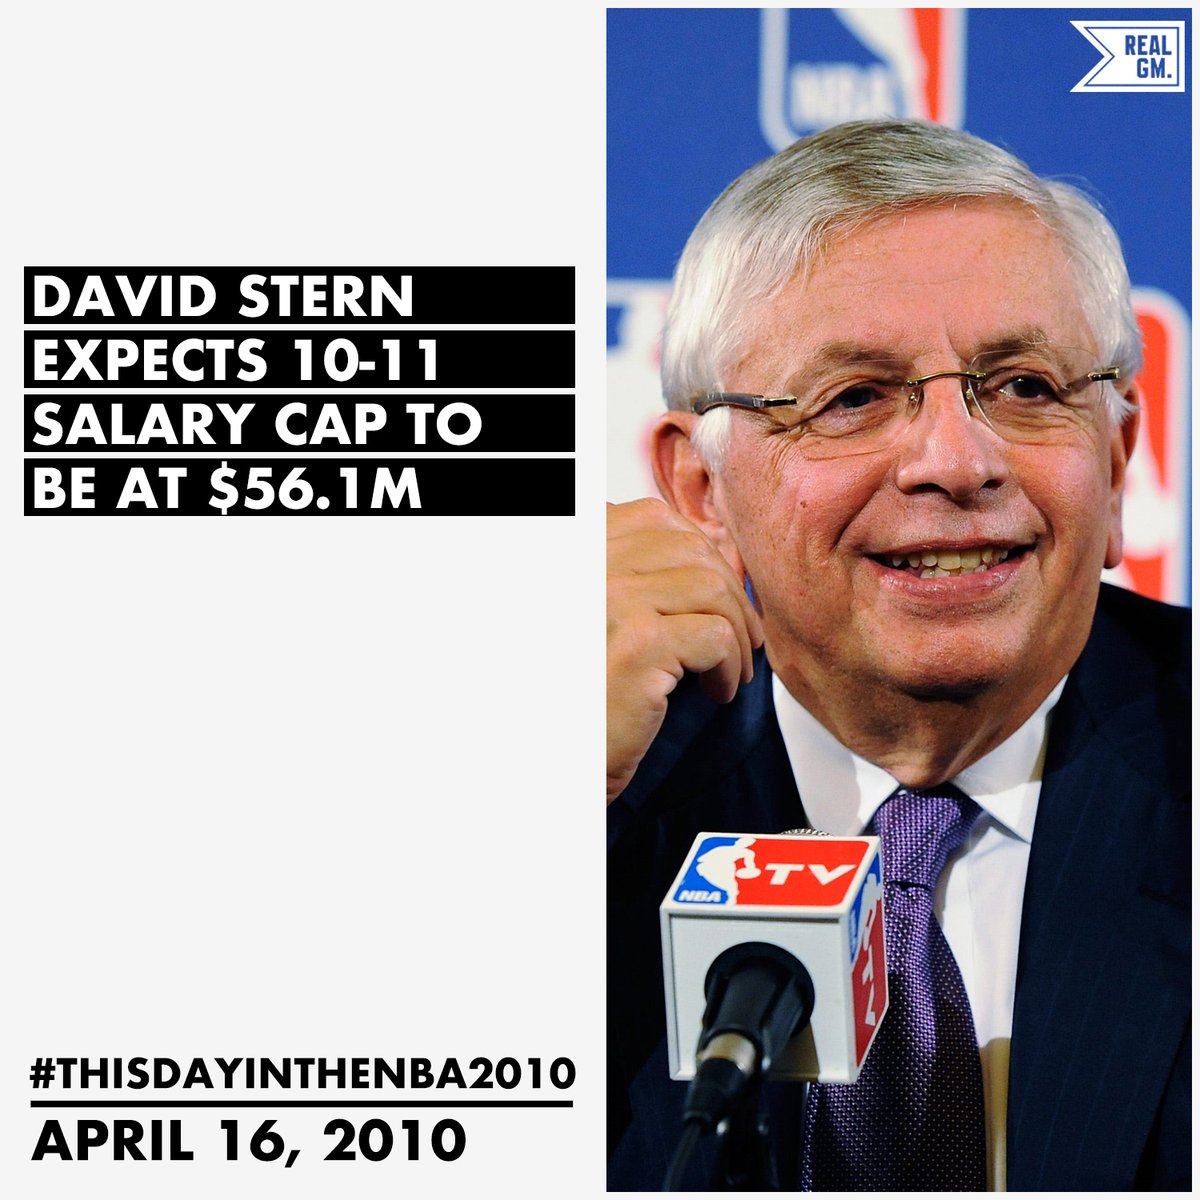  #ThisDayInTheNBA2010April 16, 2010David Stern Expects 10-11 Cap To Be At $56.1M https://basketball.realgm.com/wiretap/203333/David-Stern-Expects-10-11-Cap-To-Be-At-$561M